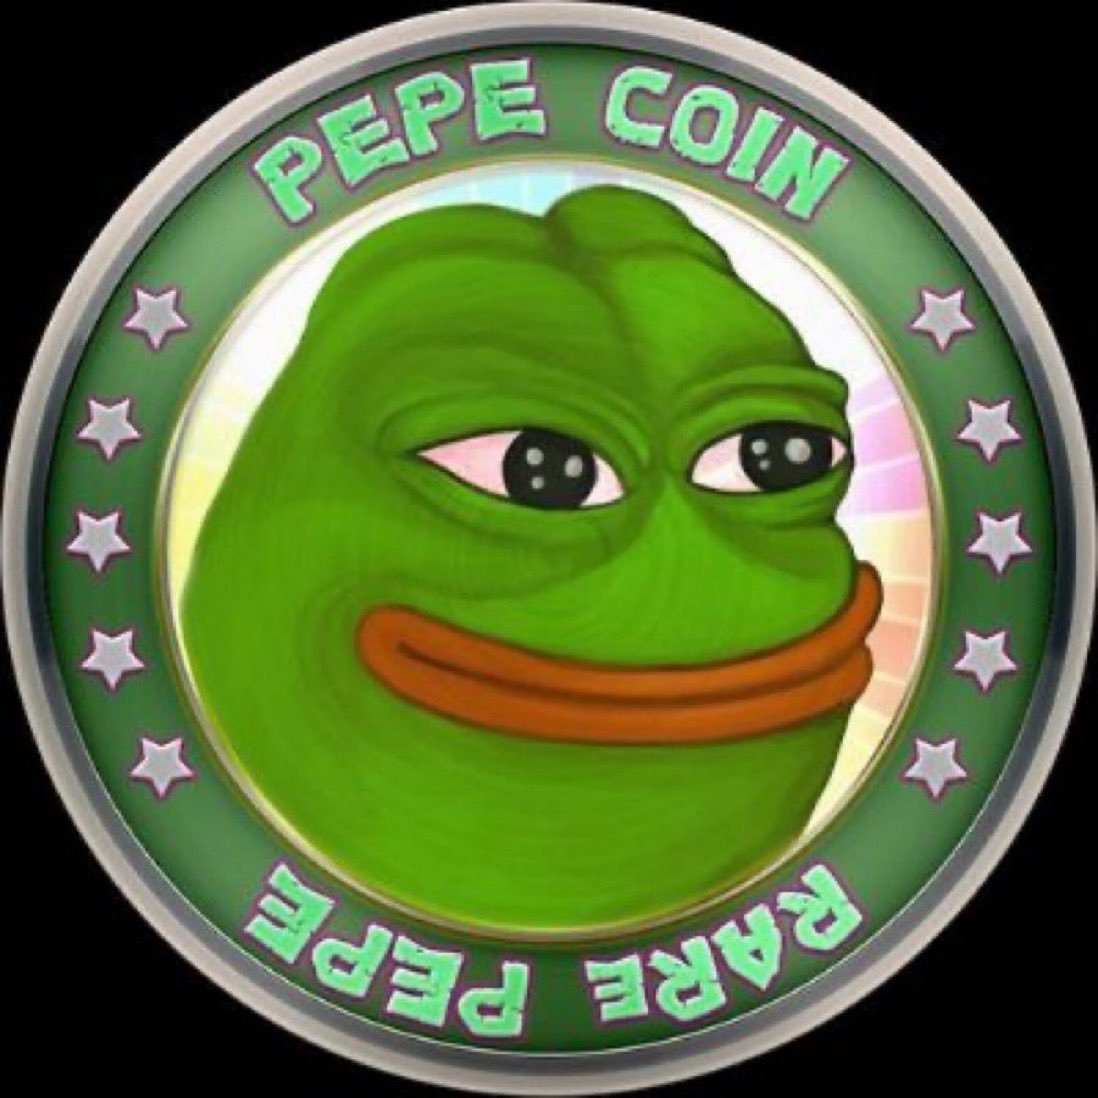 Can the logo of the original PepeCoin from 2016,
@pepecoins
(not that other copy cat), get 300 likes?